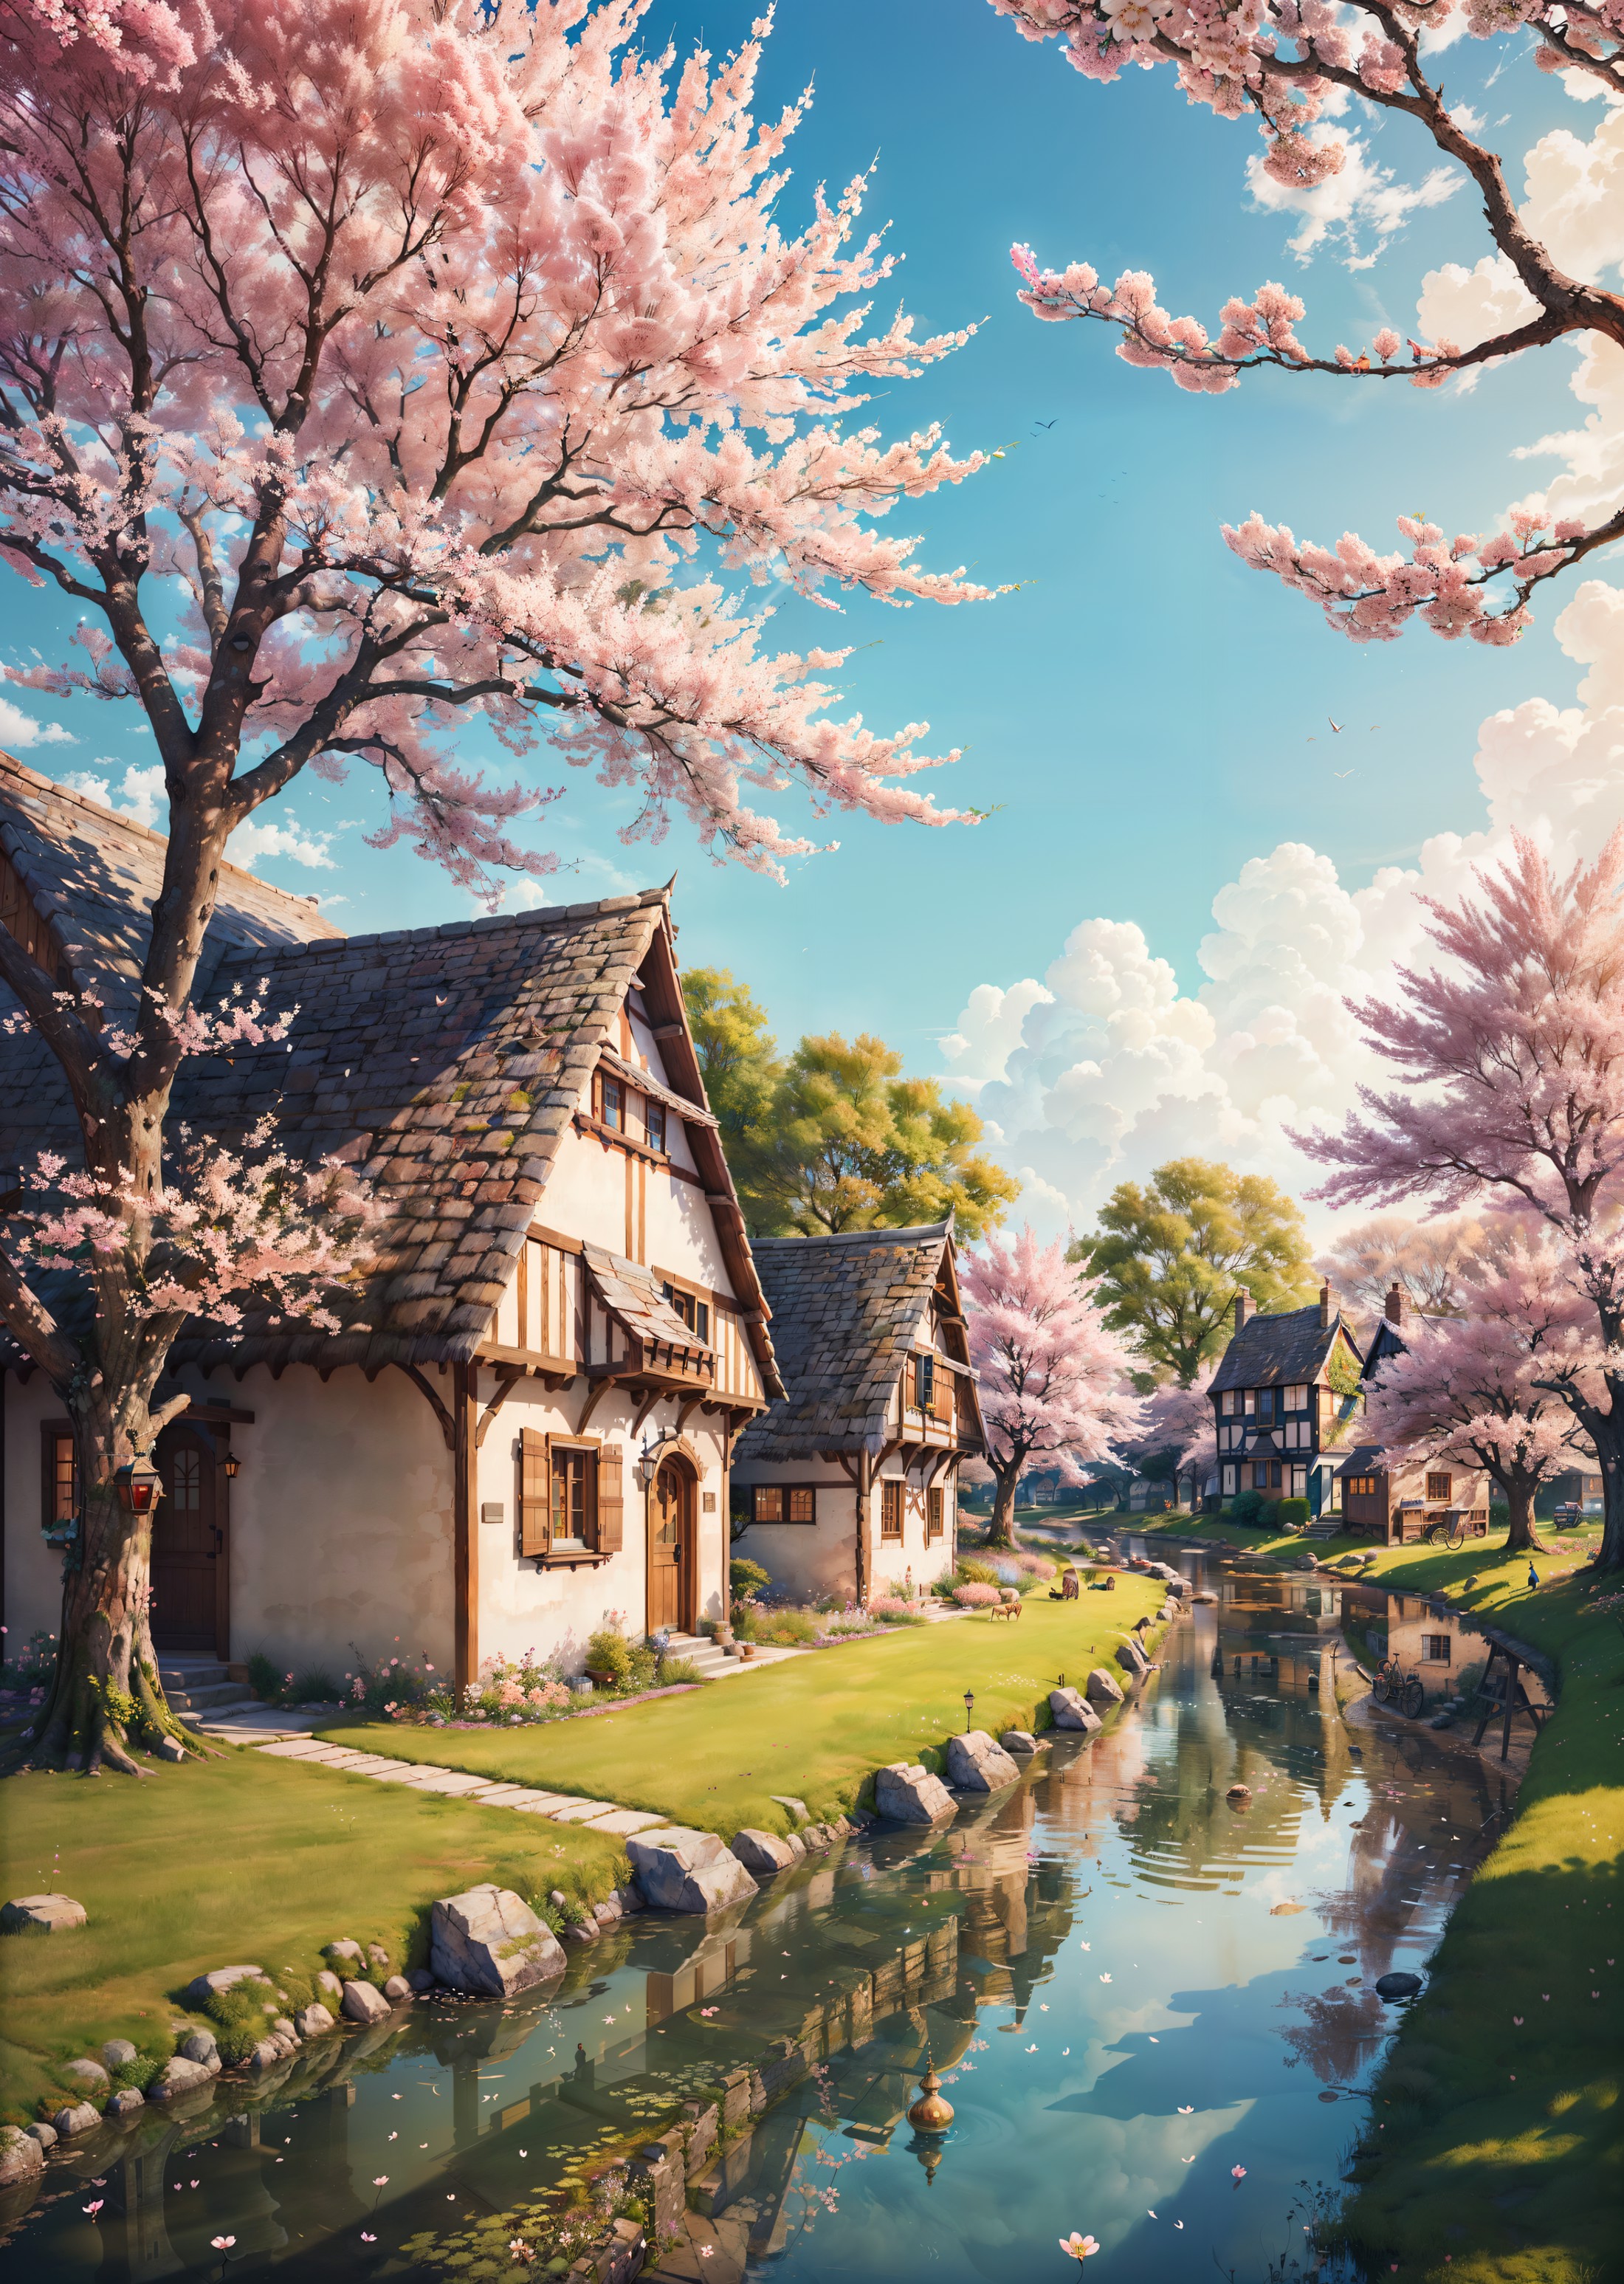 An enchanting digital illustration of a medieval town serene and magical, pastel hues, cherry blossom trees, tranquil rive...